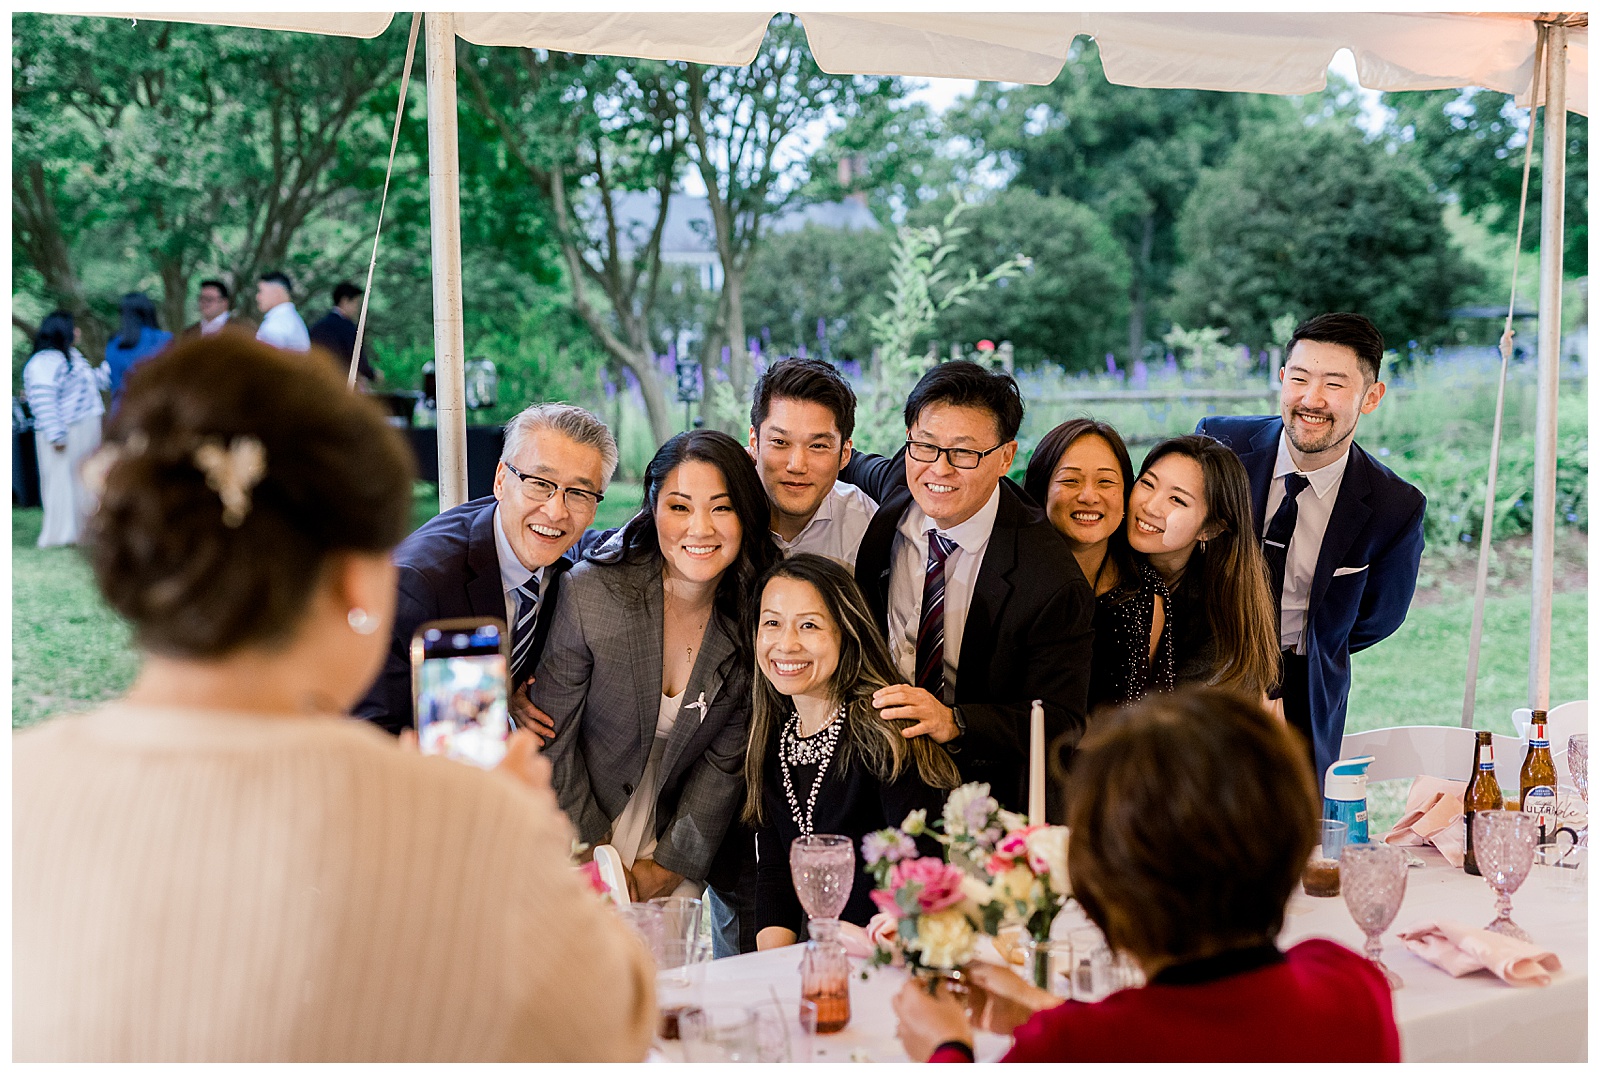 guests taking selfies during reception